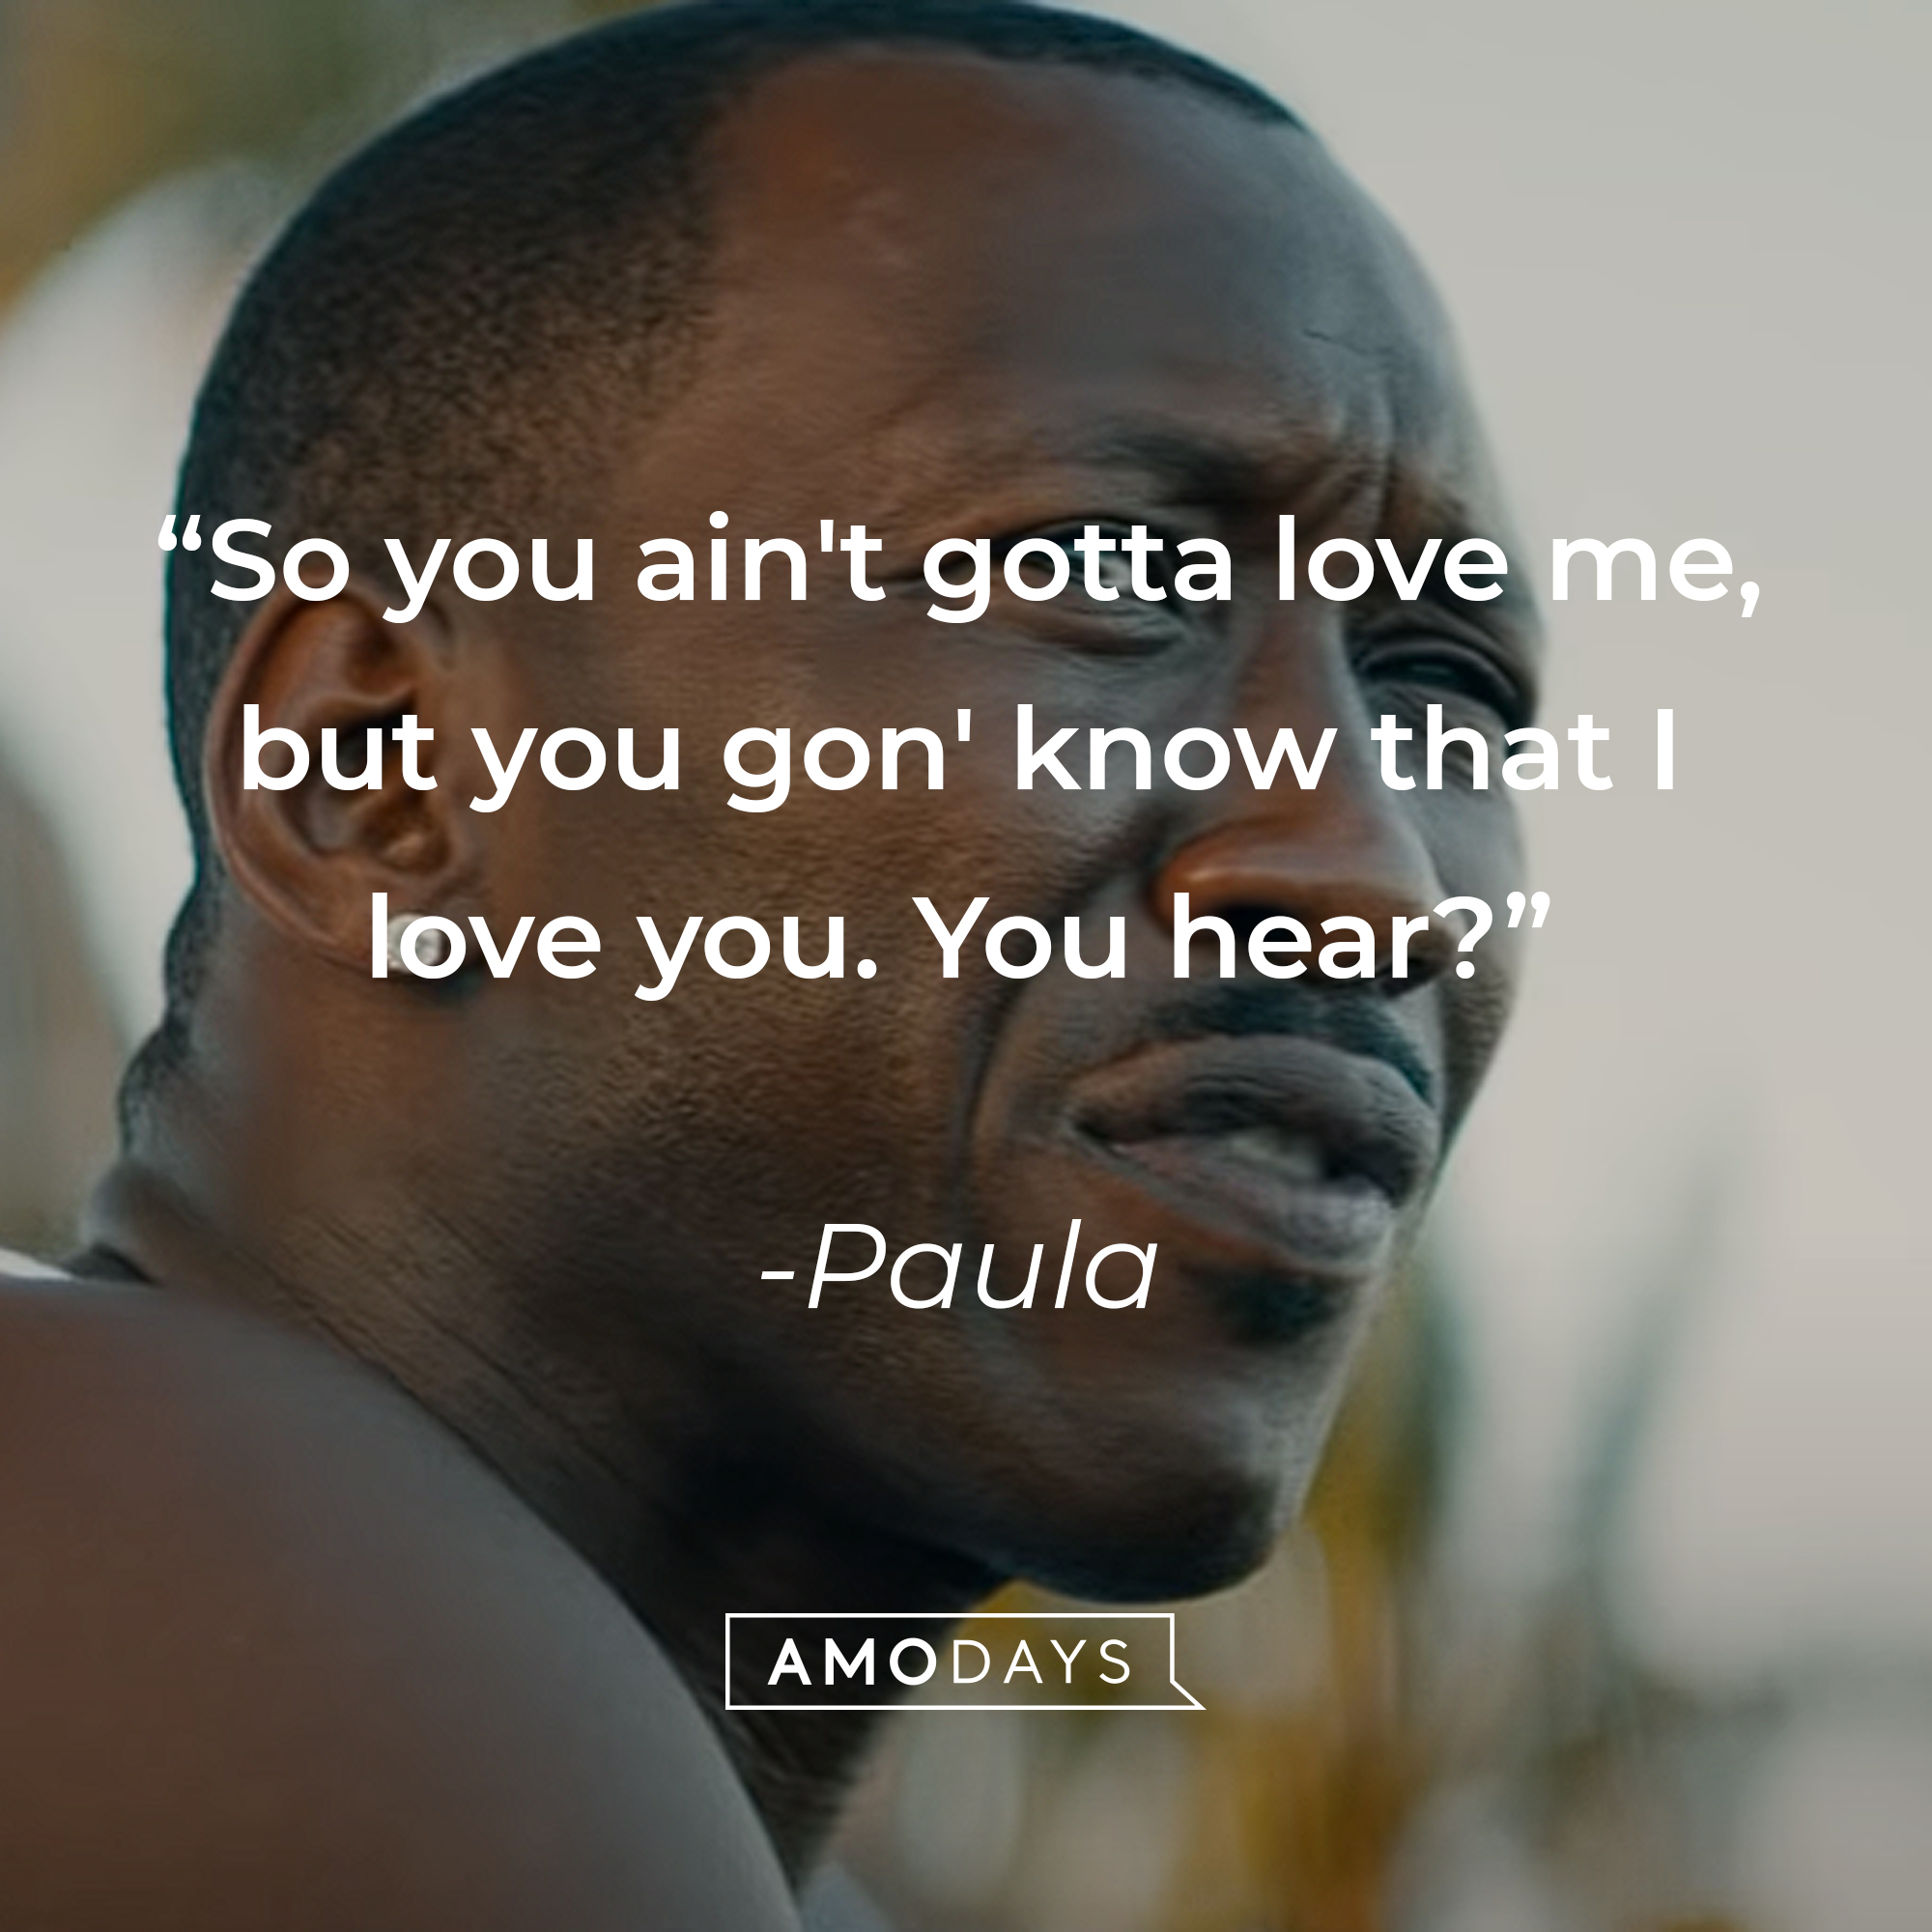 An image of Juan with Paula’s quote: “So you ain't gotta love me, but you gon' know that I love you. You hear?” | Source: youtube.com/A24